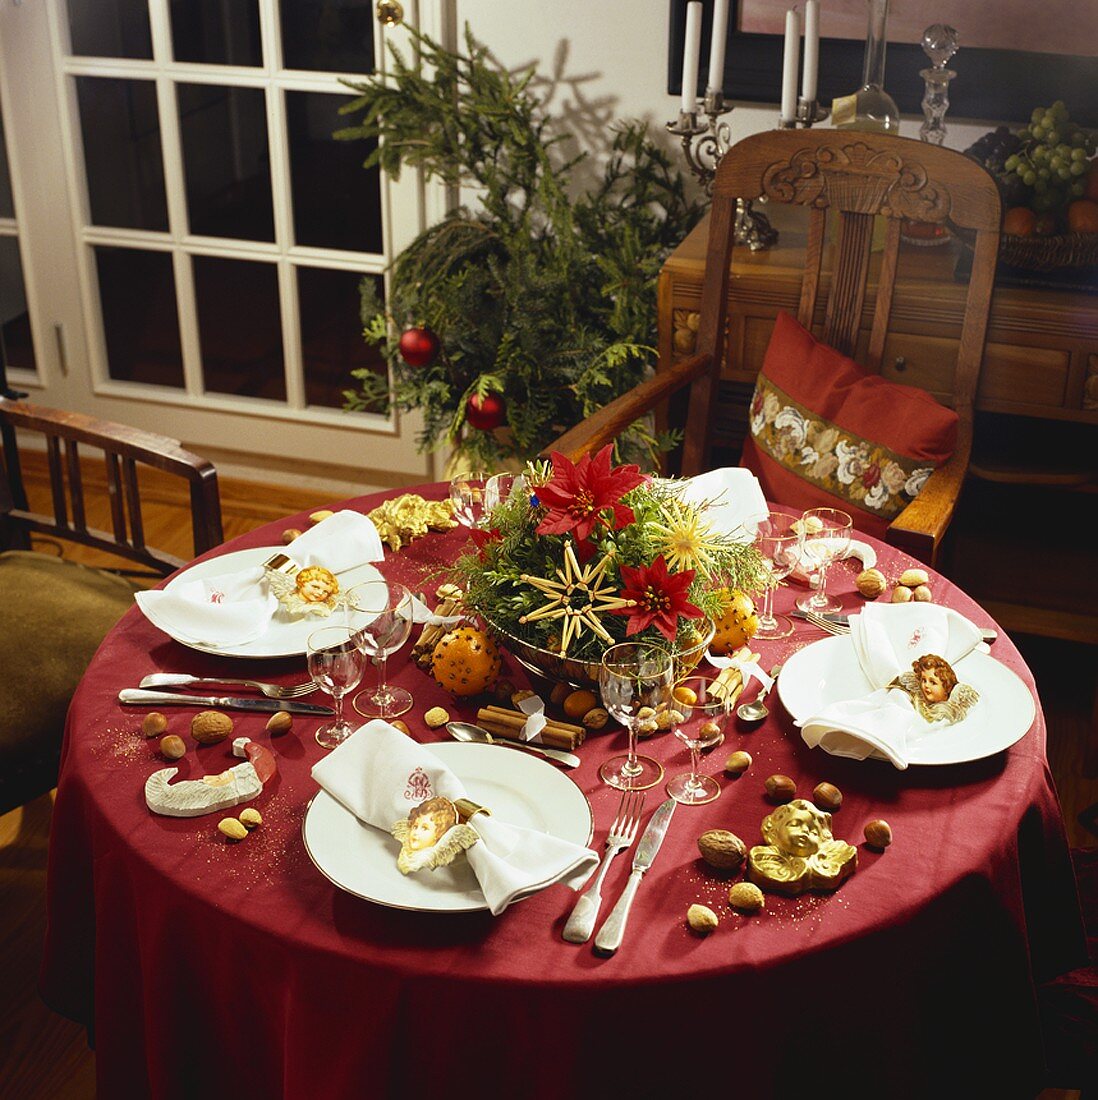 Festive Christmas table in red